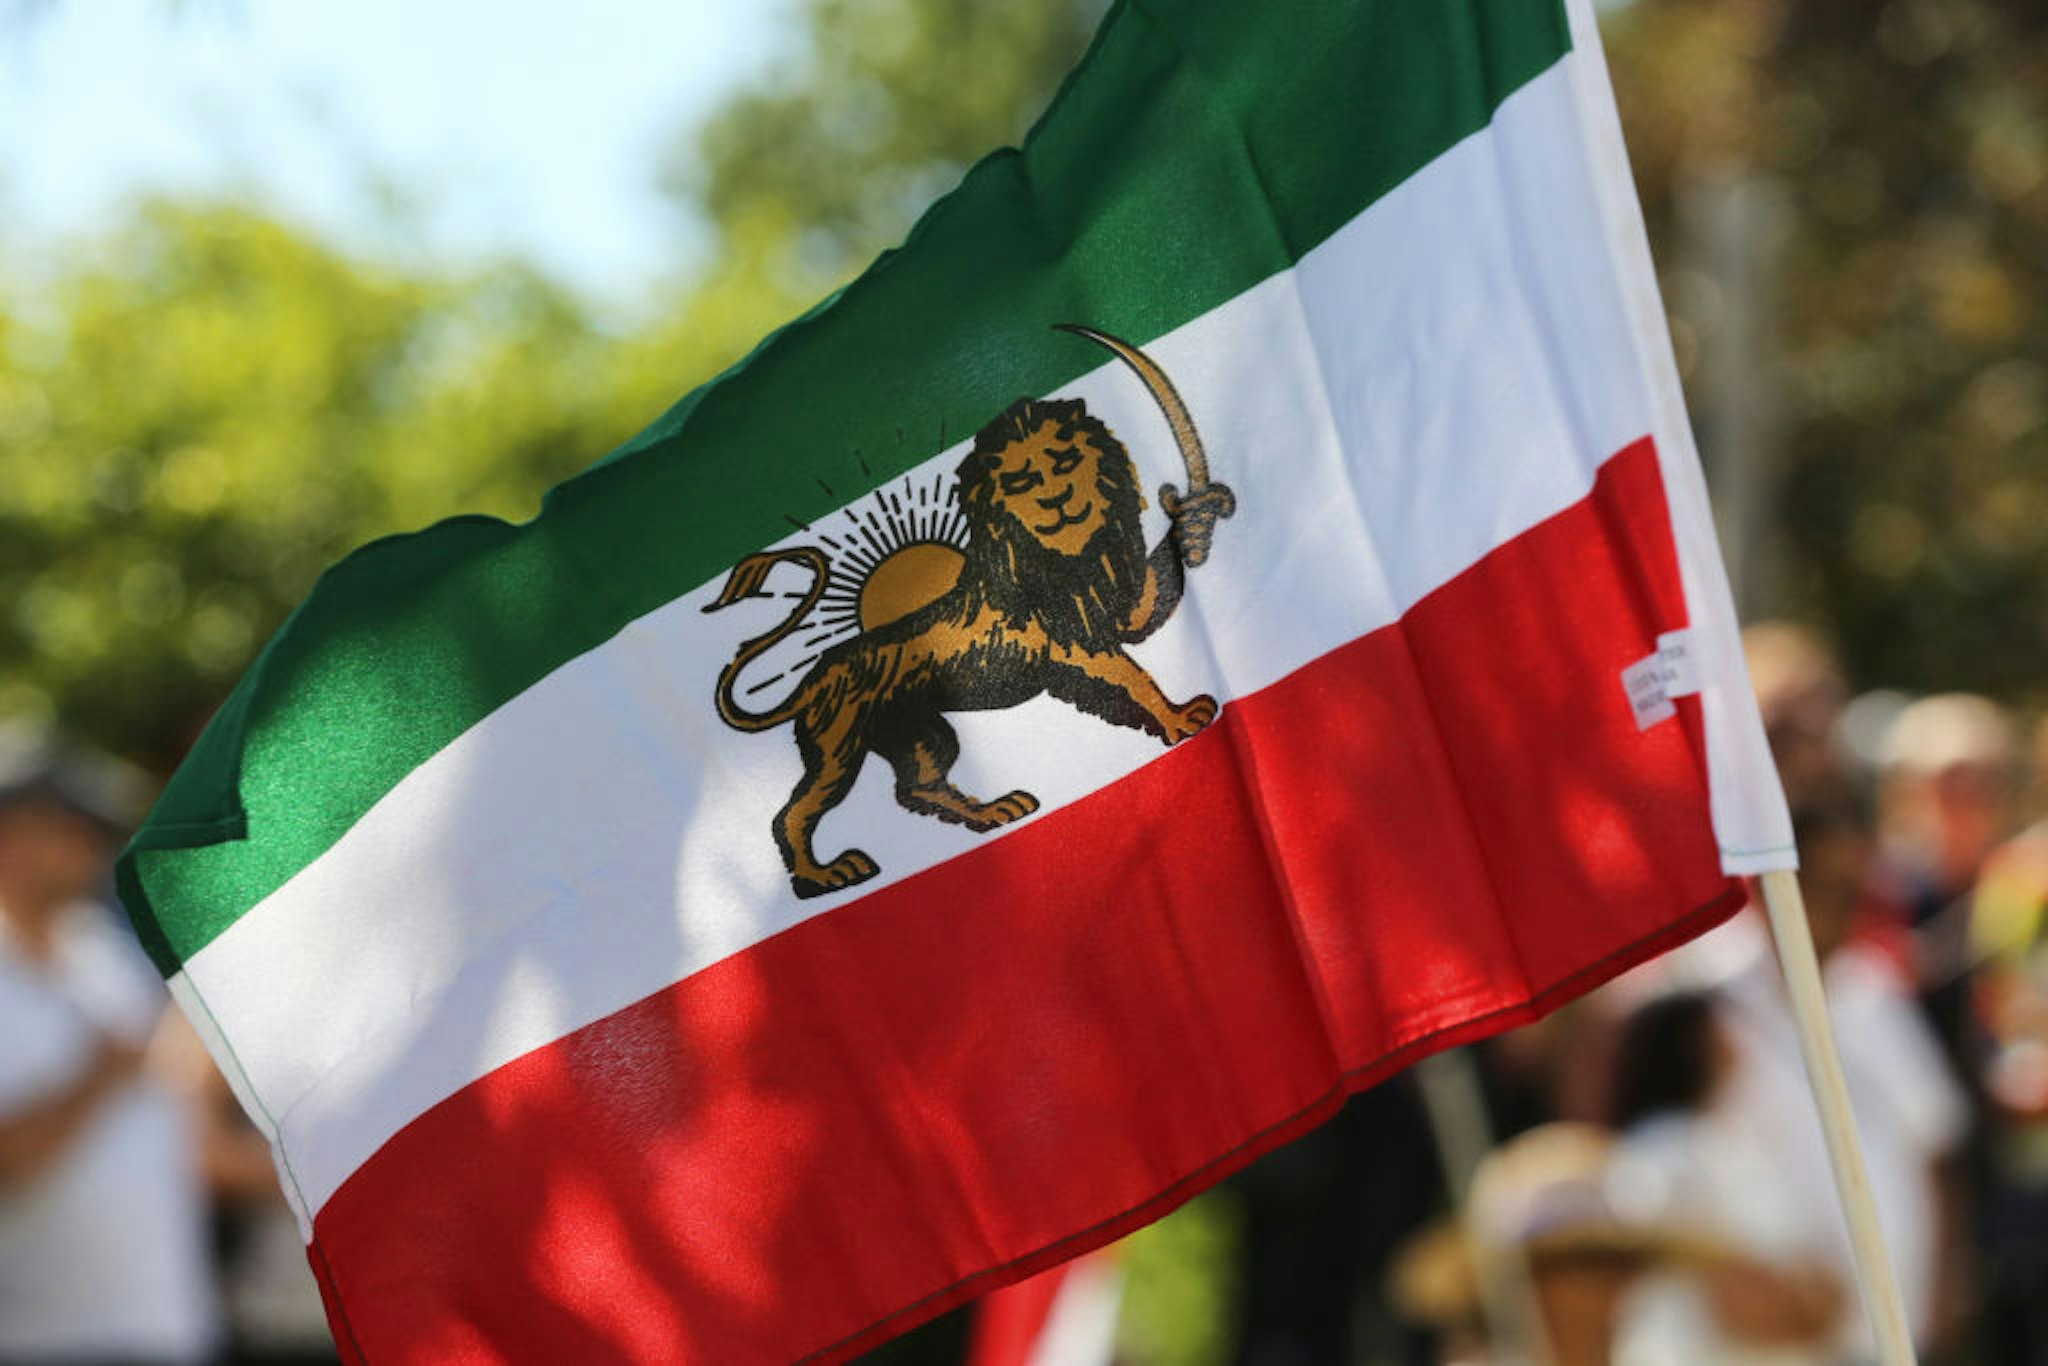 Iranian flag seen during the first ever Persian parade in Toronto, Ontario, Canada, on August 31, 2019. The parade showcased traditional costumes that illustrated the diverse cultural traditions and history of Iran.